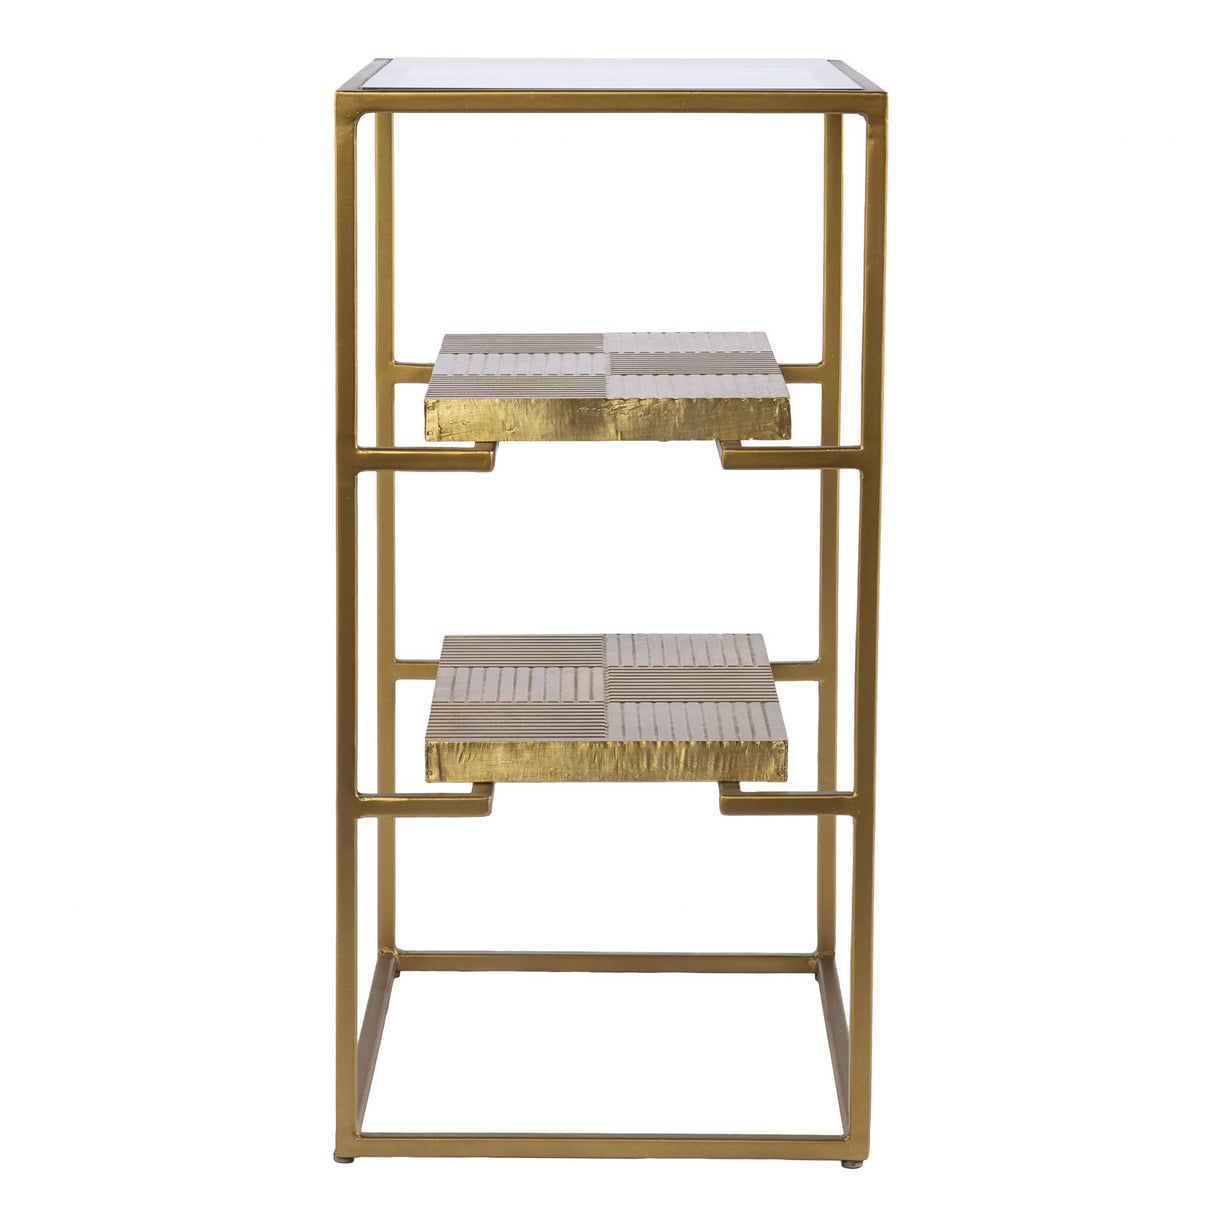 24" Brass Glass And Iron Rectangular End Table With Two Shelves